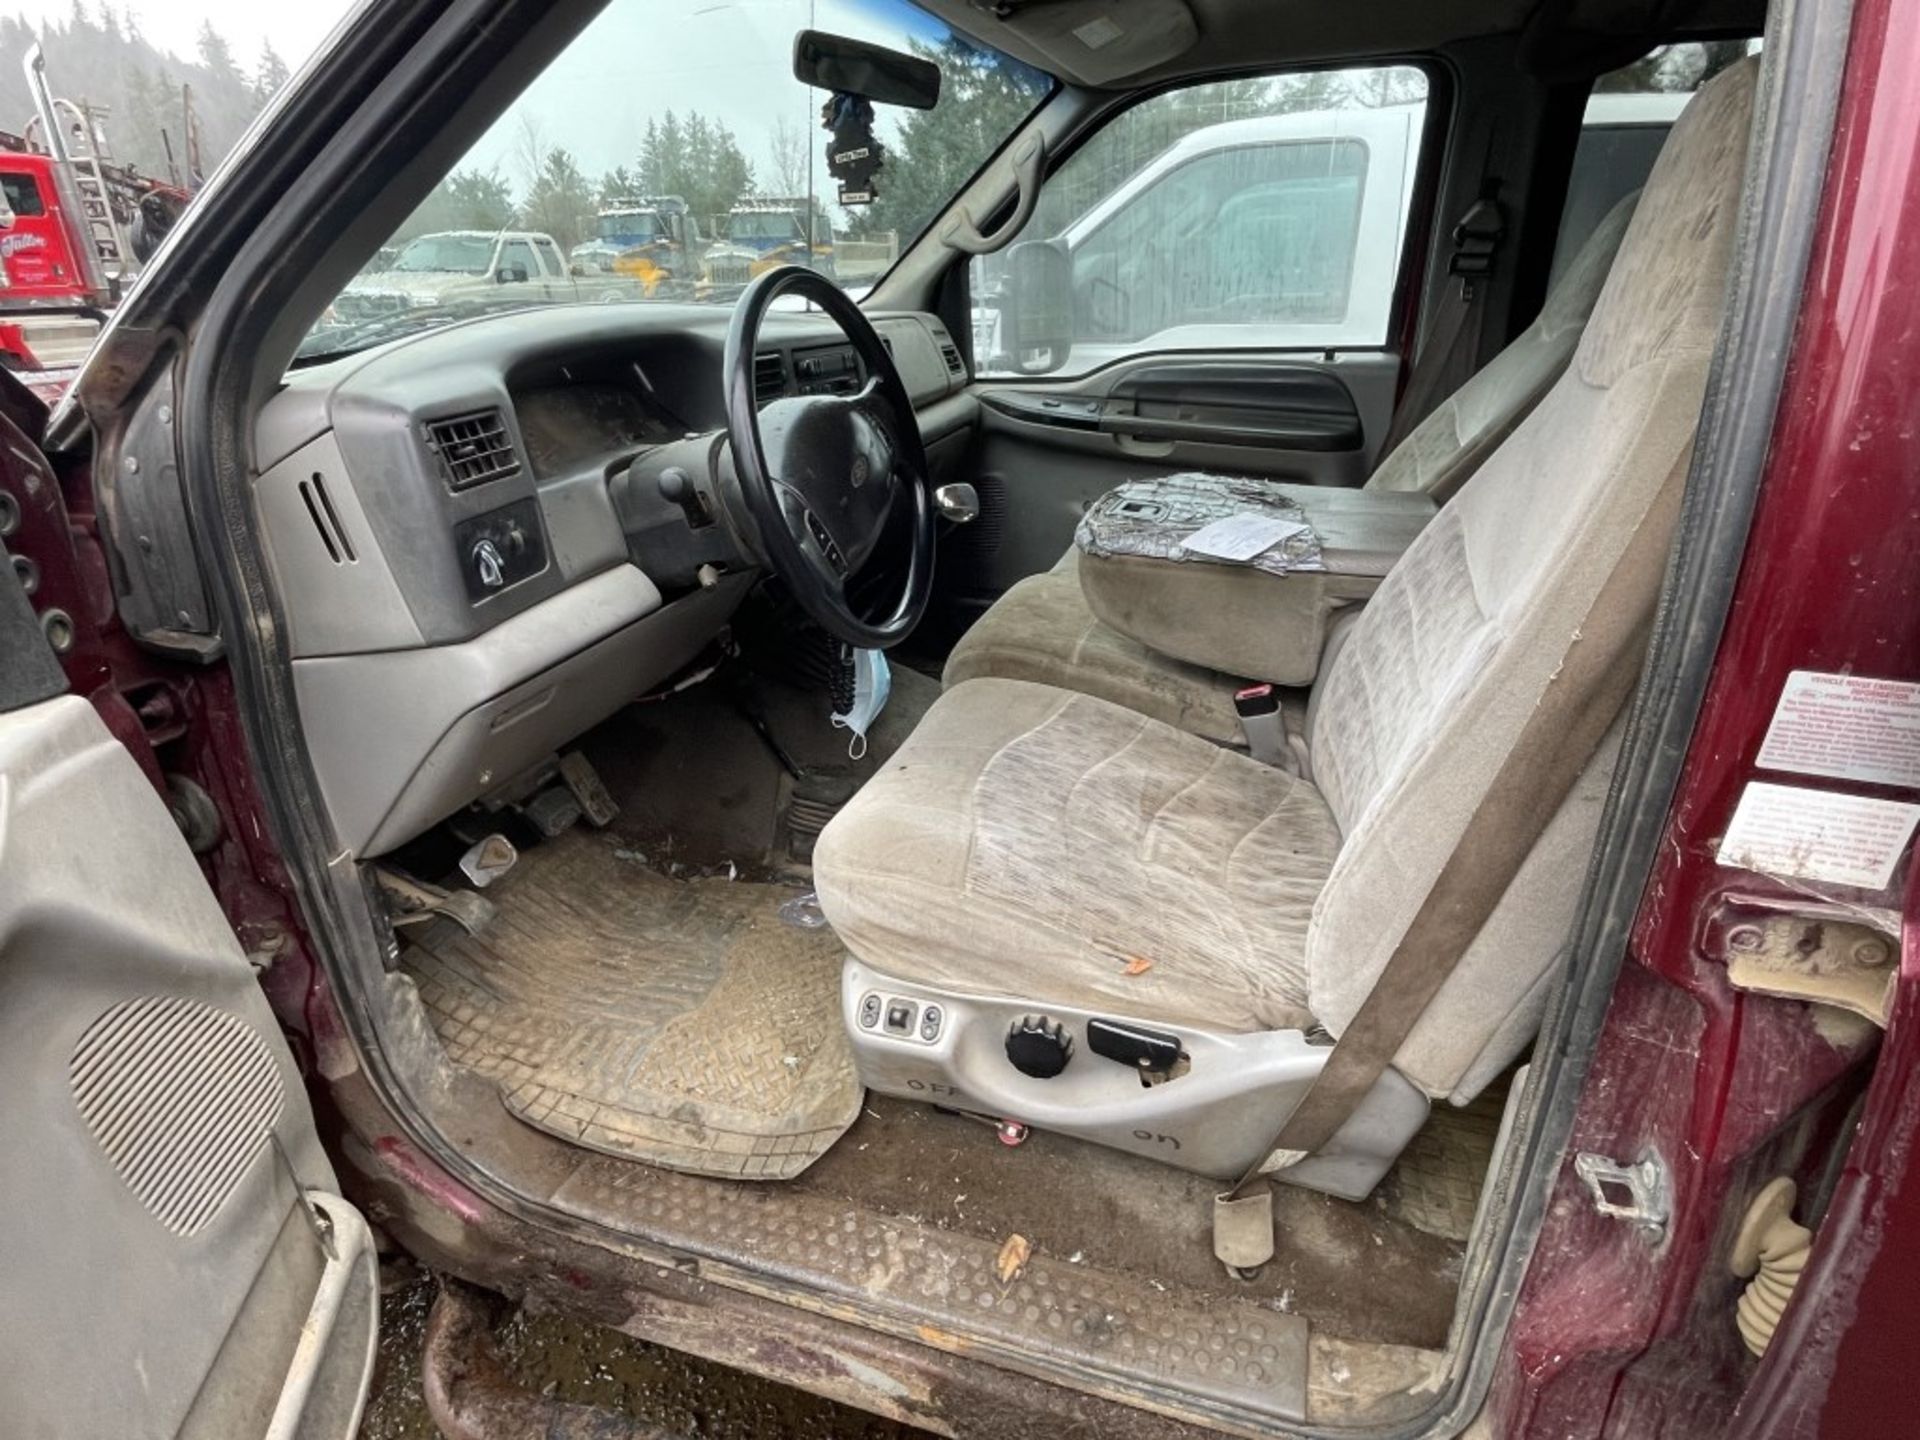 1999 Ford F350 XLT SD 4x4 Crew Cab Pickup - Image 7 of 17